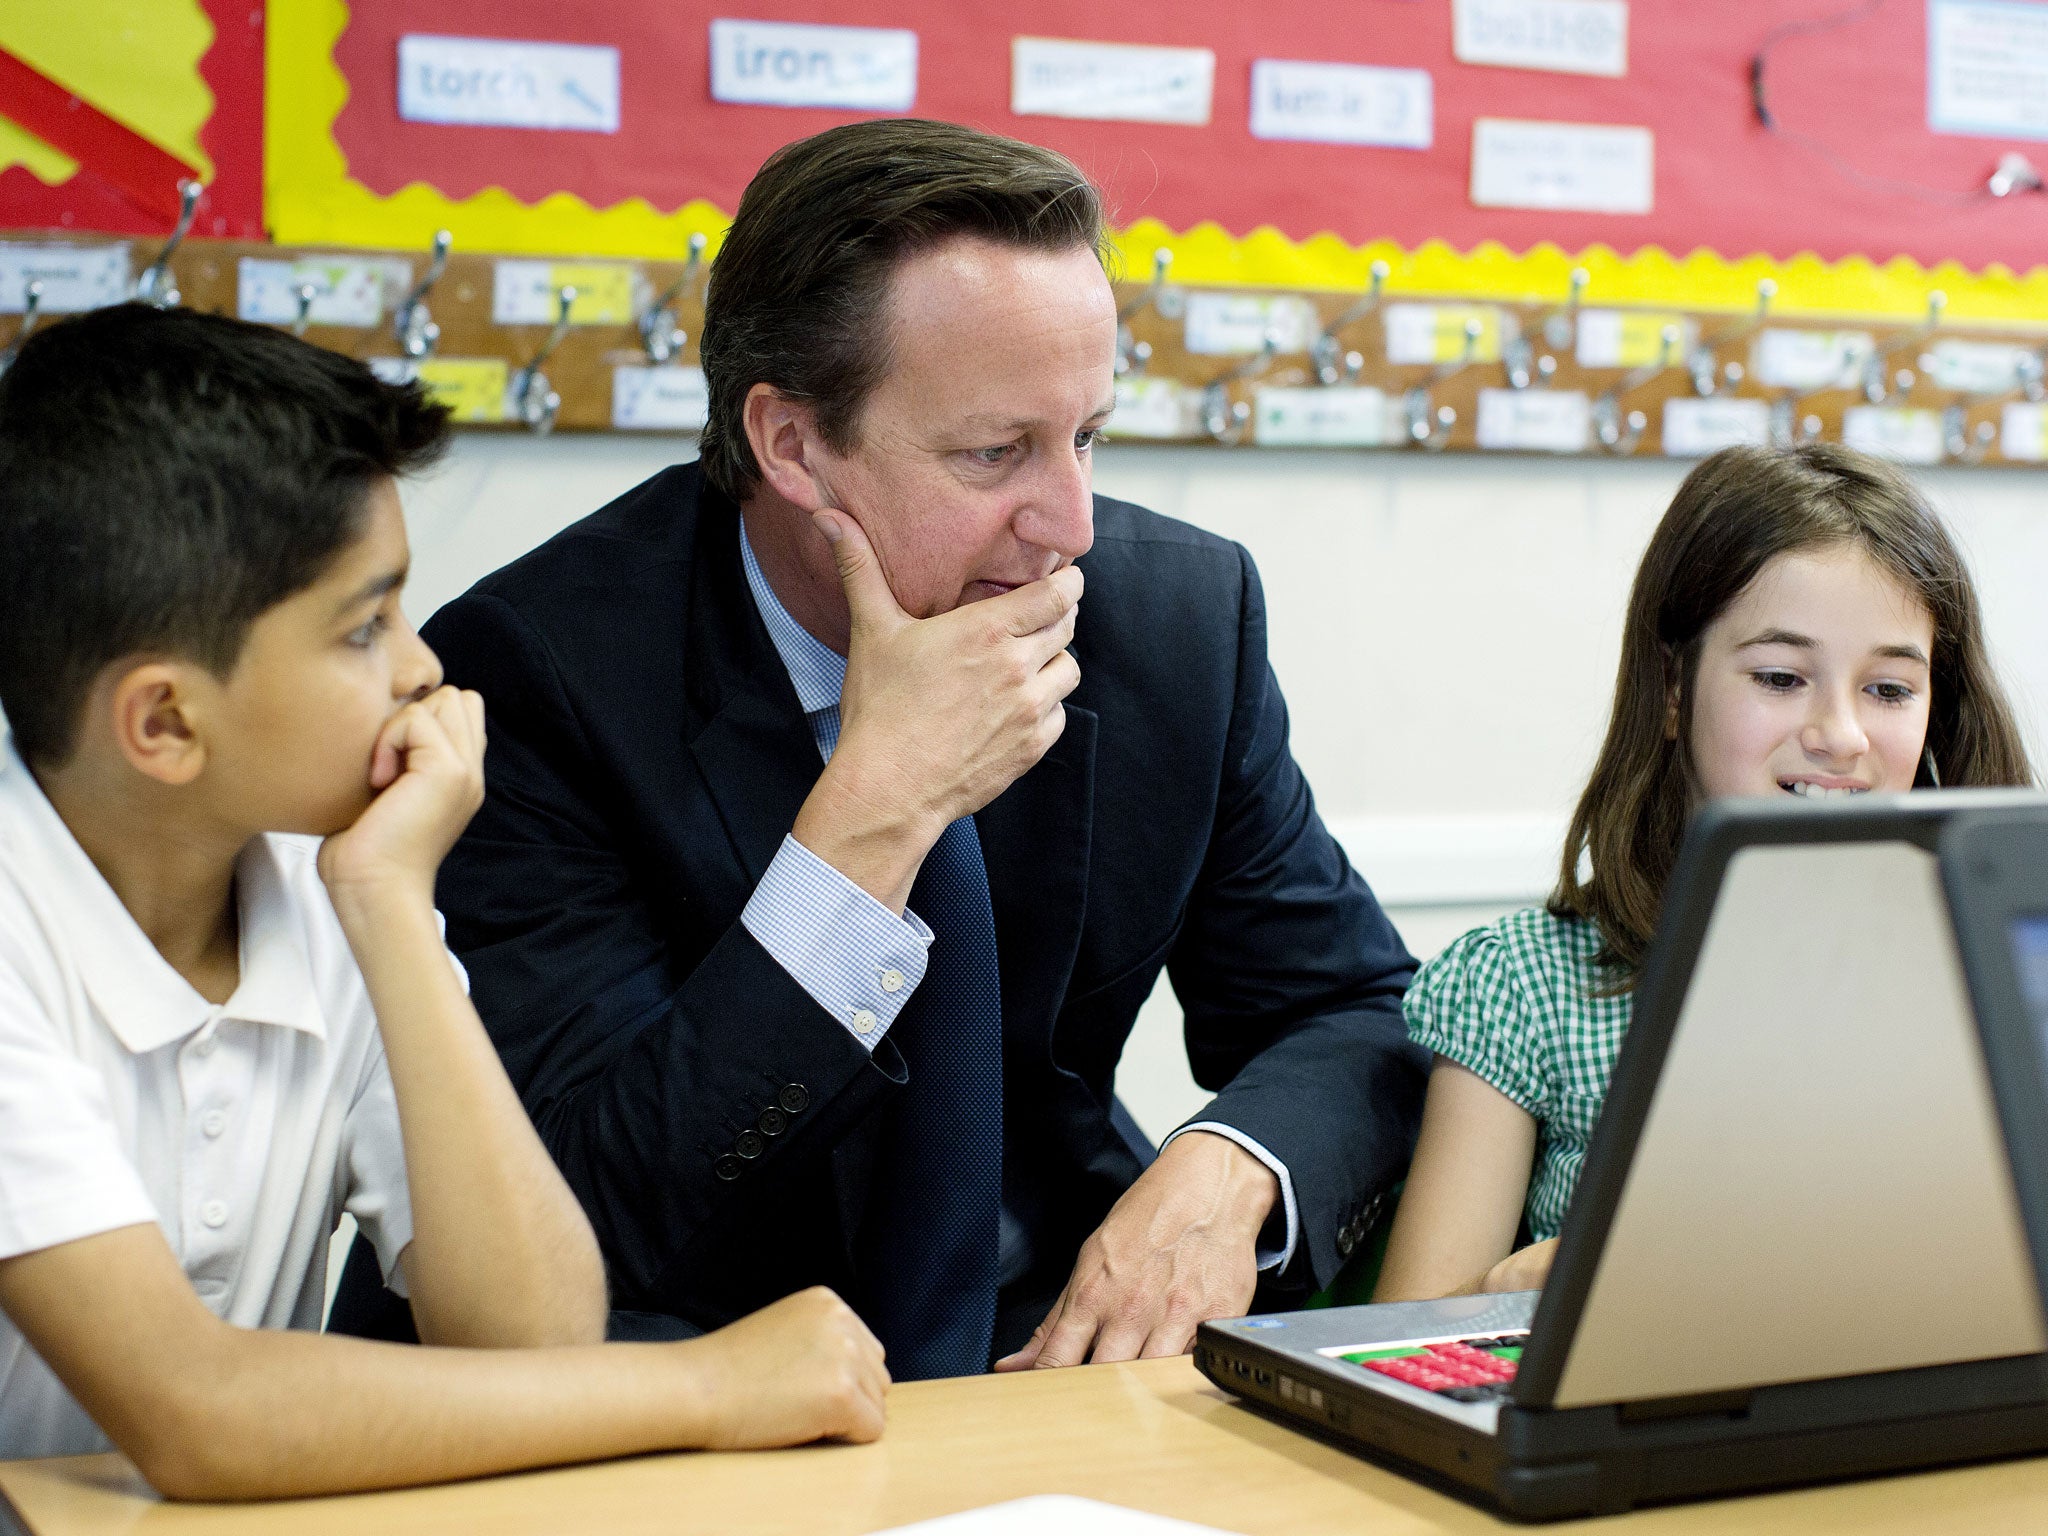 Britain's Prime Minister David Cameron sits with pupils Abdullah Rashid (9) and Anna Seitoar (9) in a computer class during his visit to St Mary's and St John's CE School in north London on July 8, 2013.